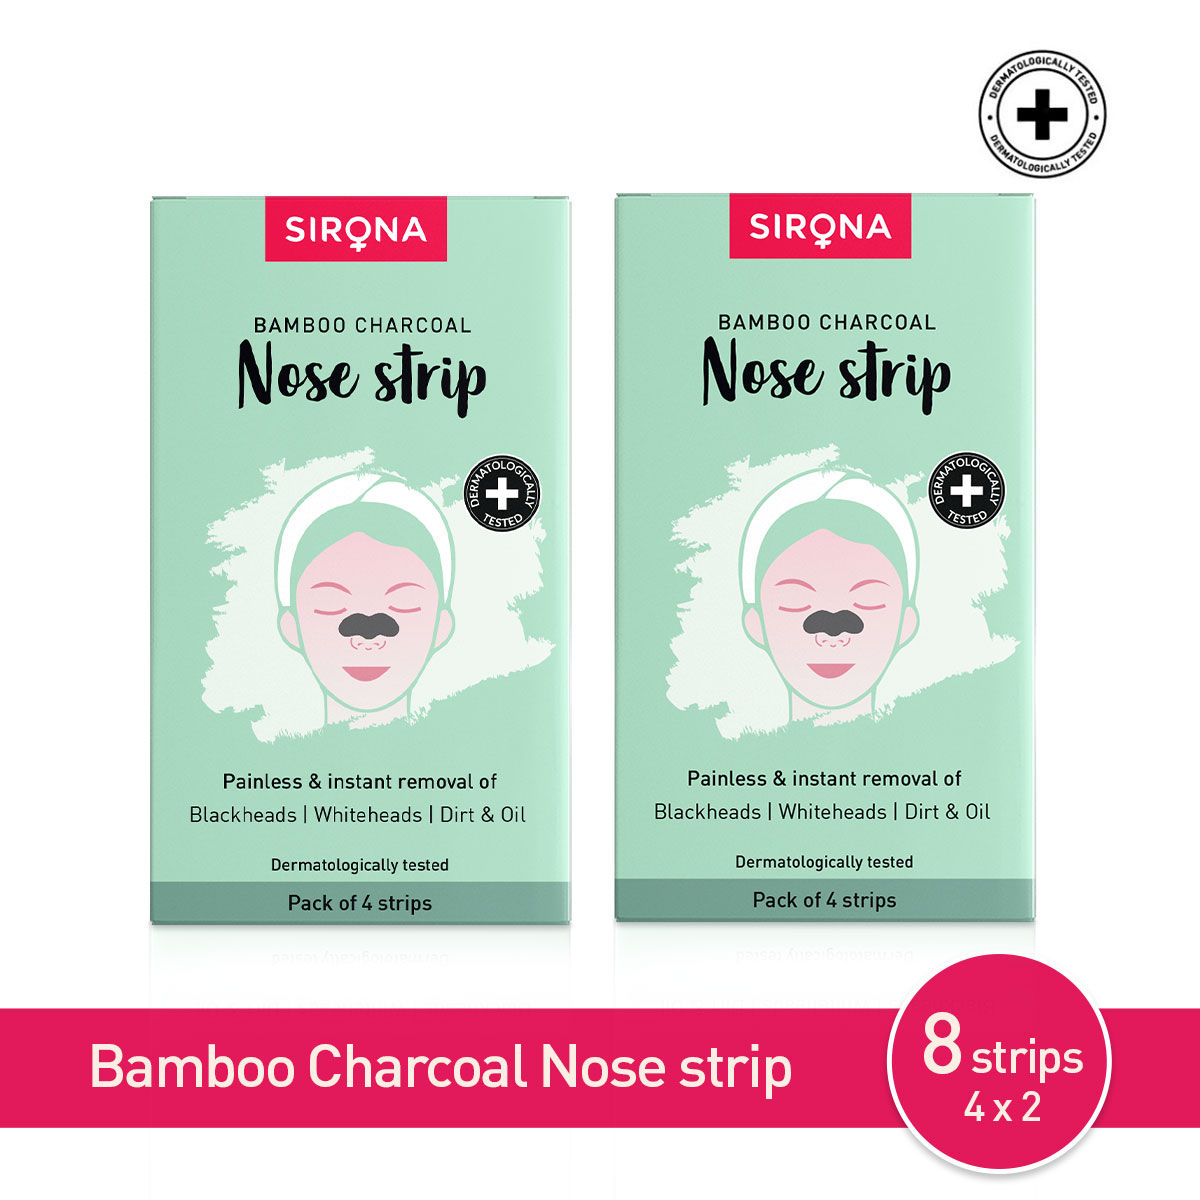 Buy Sirona Bamboo Charcoal Nose Strips for Women | Removes Blackheads and Whiteheads | 4 x 2 Strips - Purplle